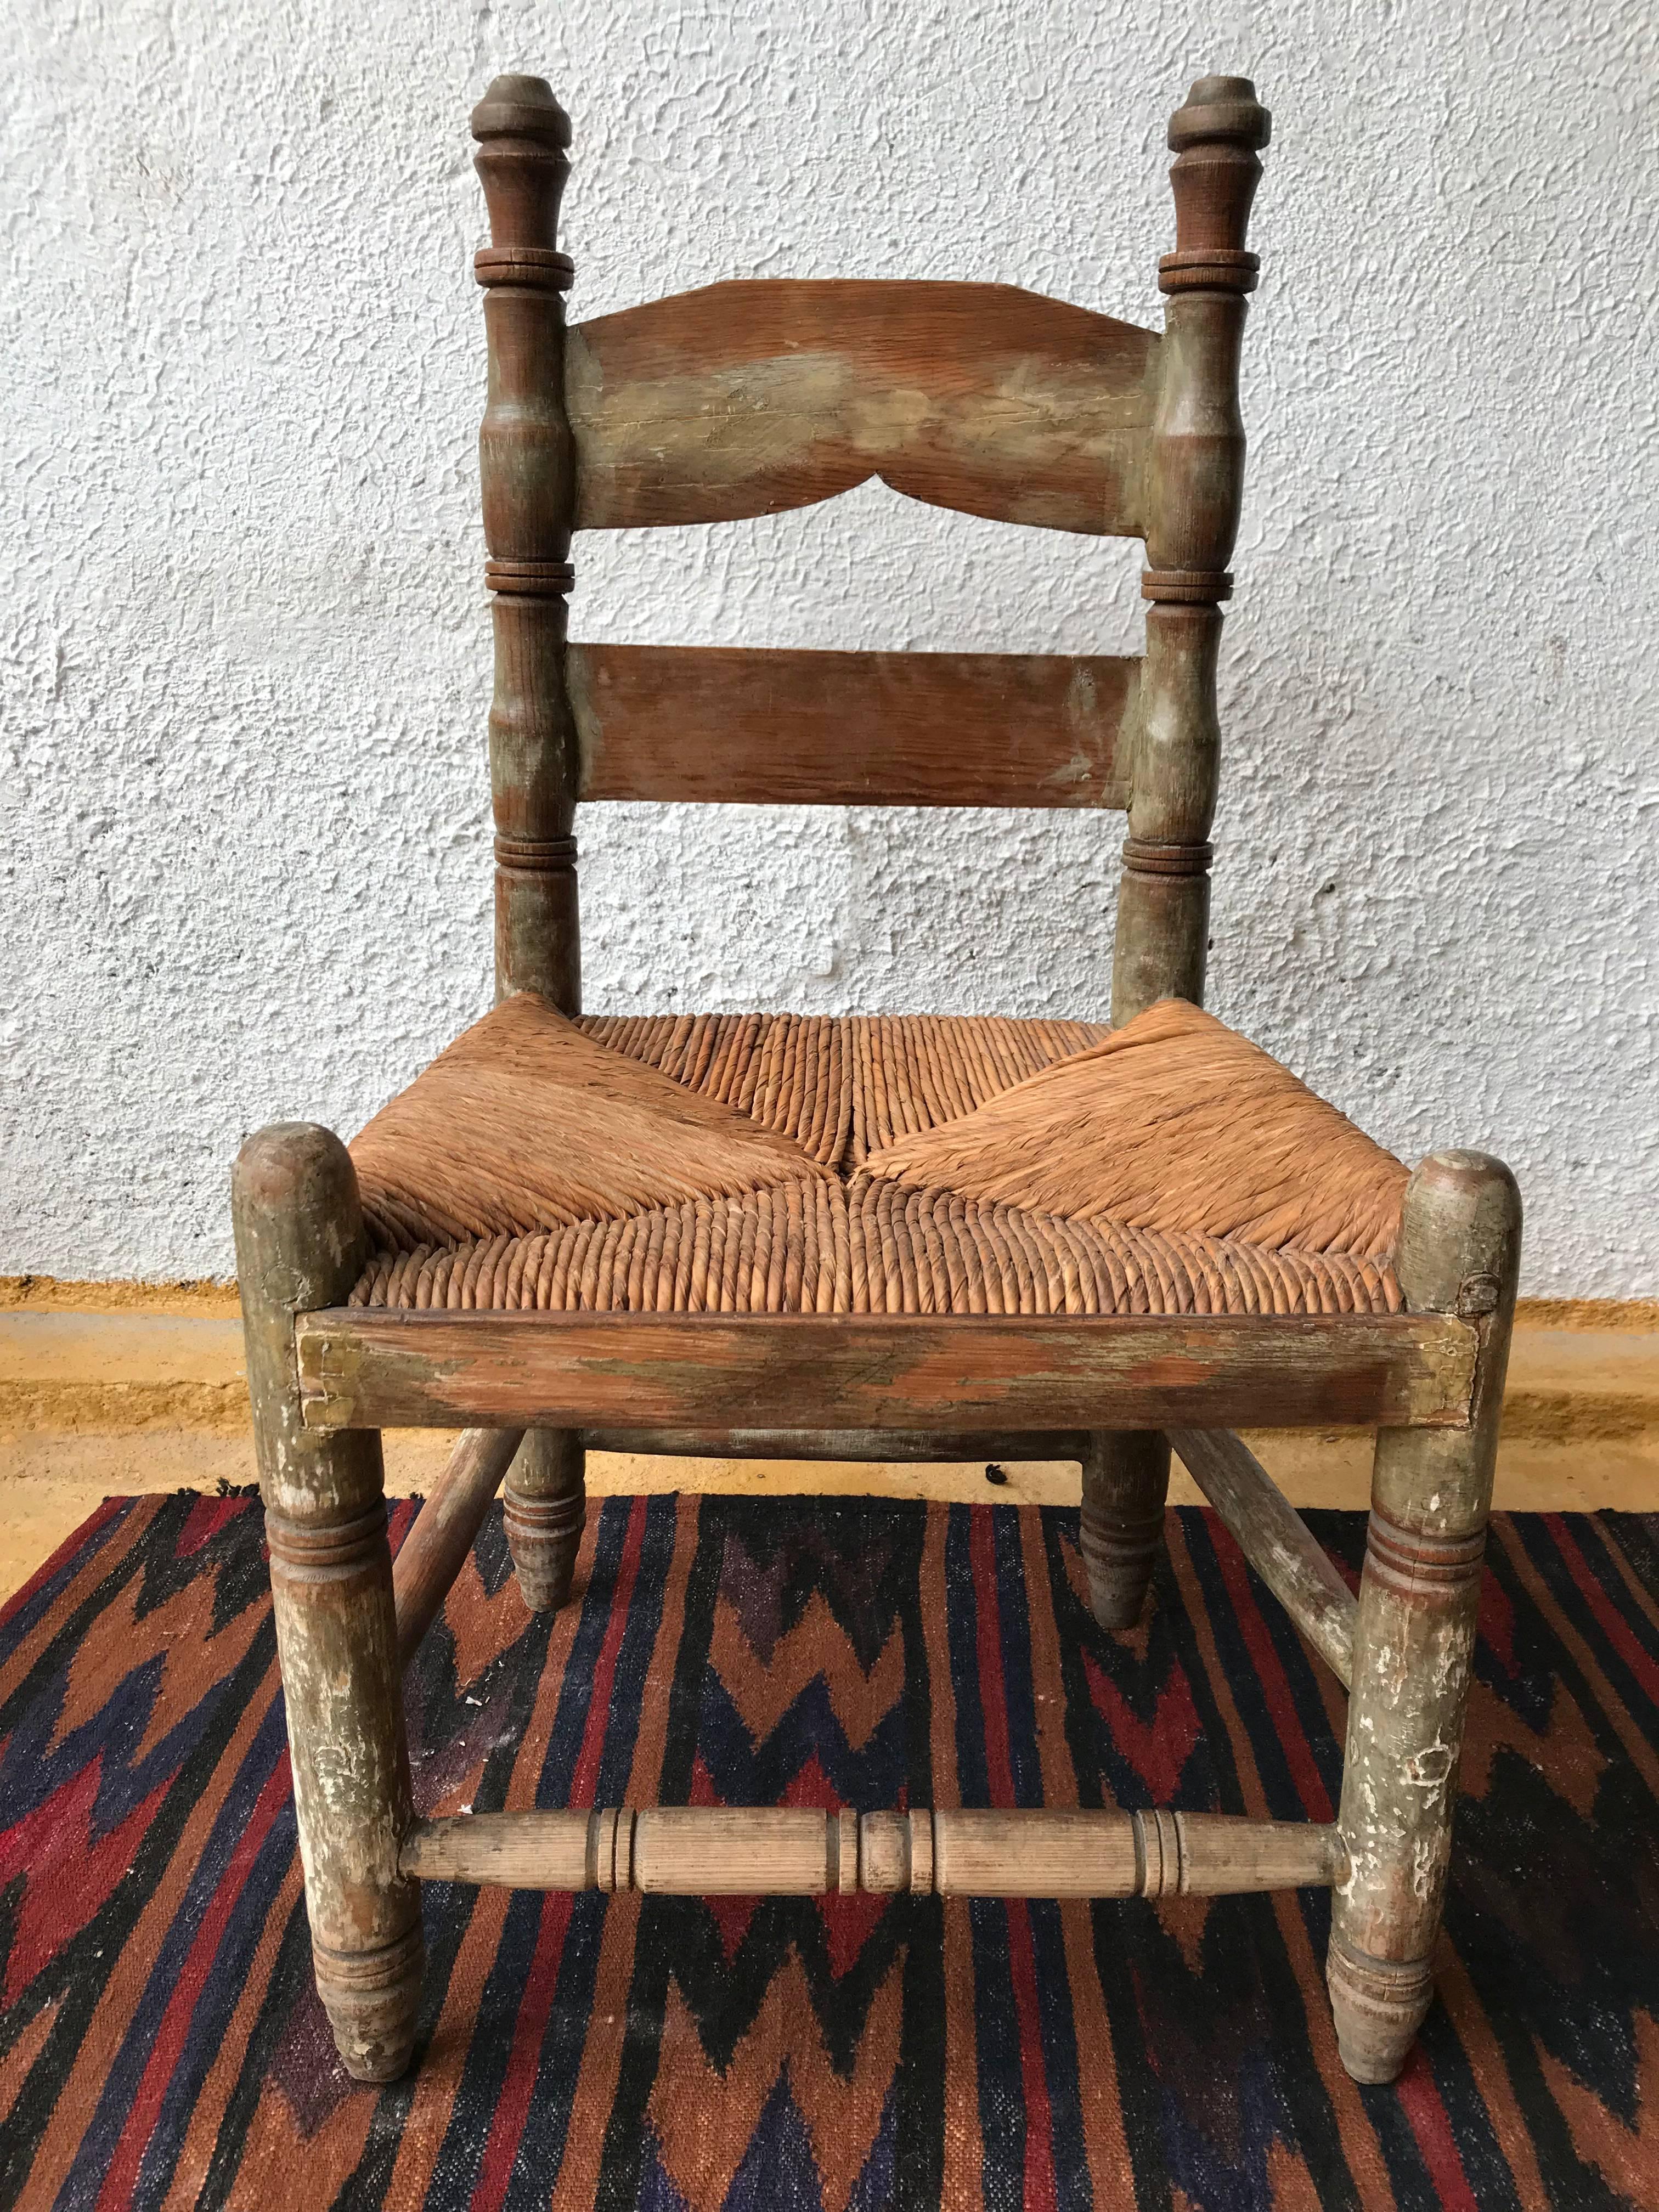 Carved Set of Six Antique Wood Chairs found in Zacatecas, México, circa 1900